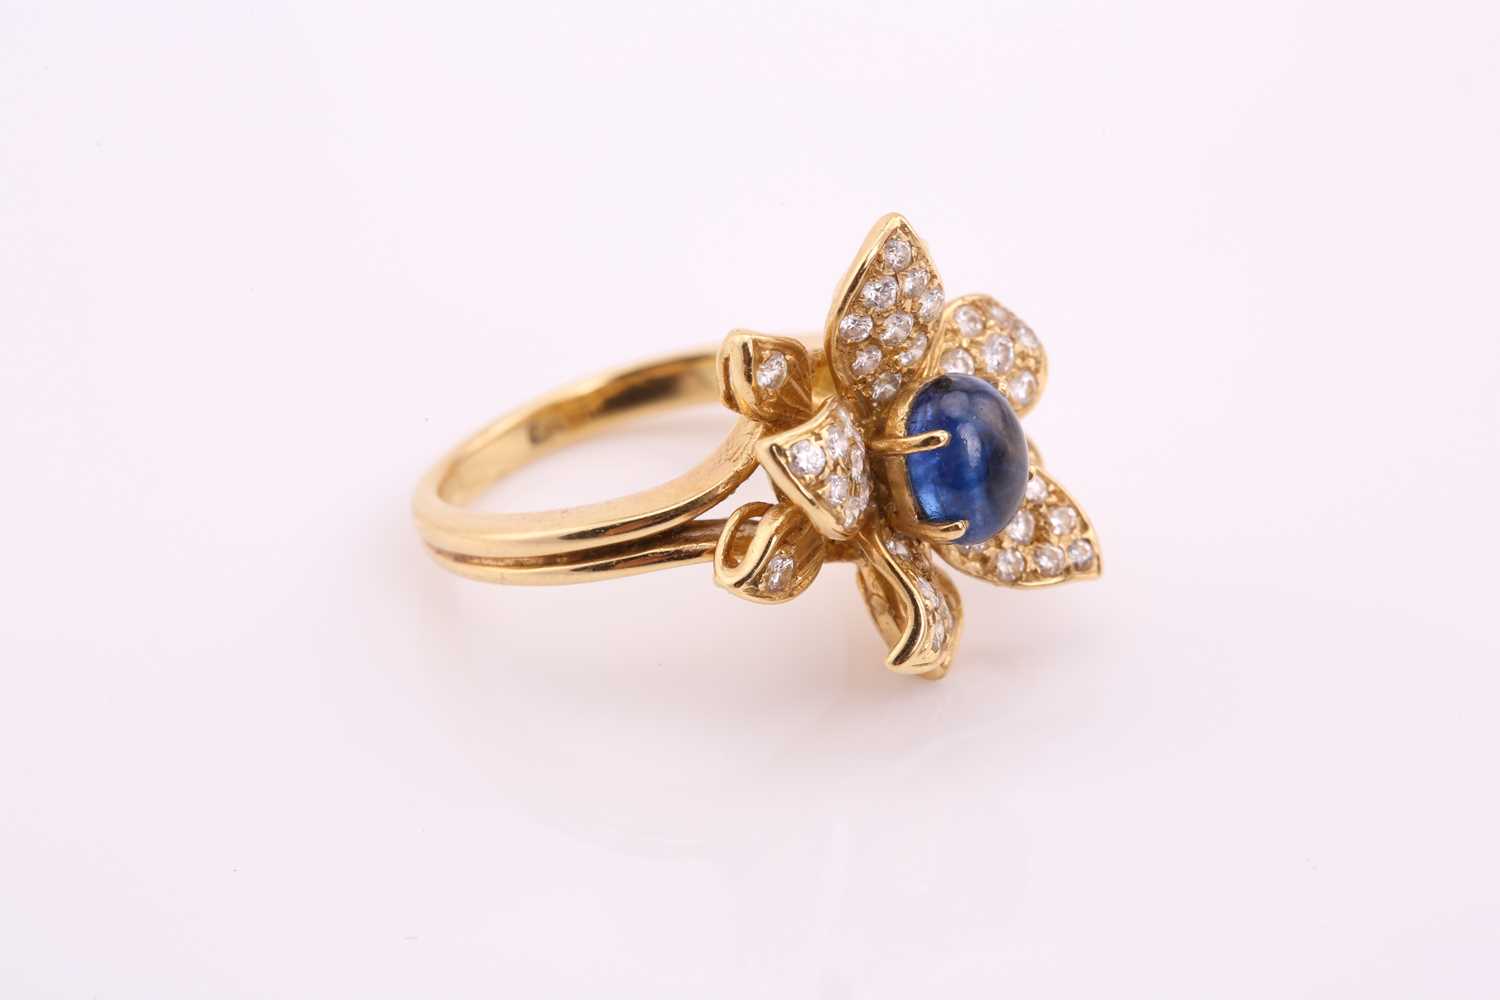 An 18ct gold sapphire and diamond flower ring, comprises an oval sapphire cabochon with a high dome, - Image 2 of 4